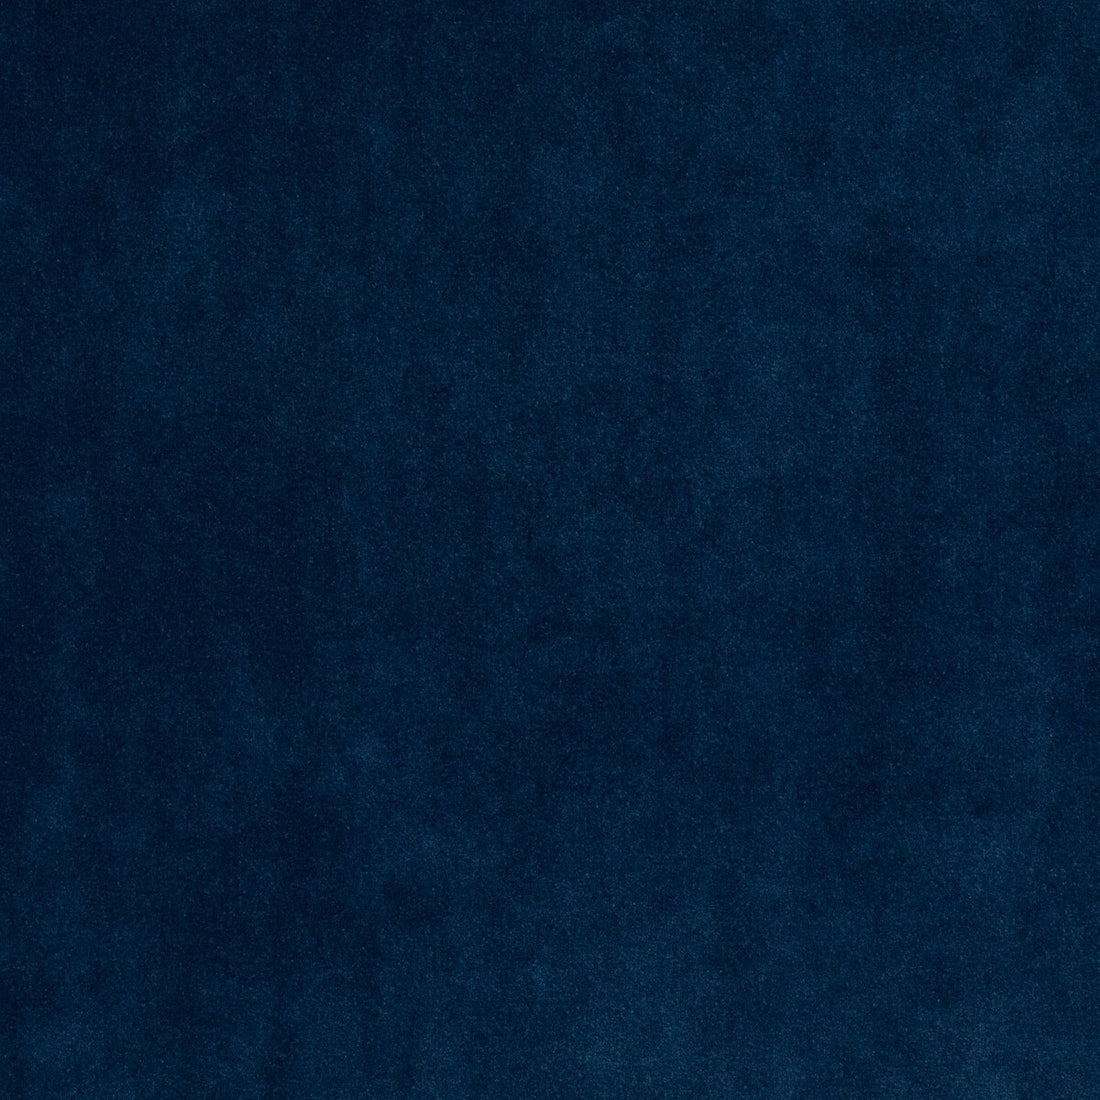 Lyla Velvet fabric in royal blue color - pattern 35825.665.0 - by Kravet Contract in the Riviera Velvet collection